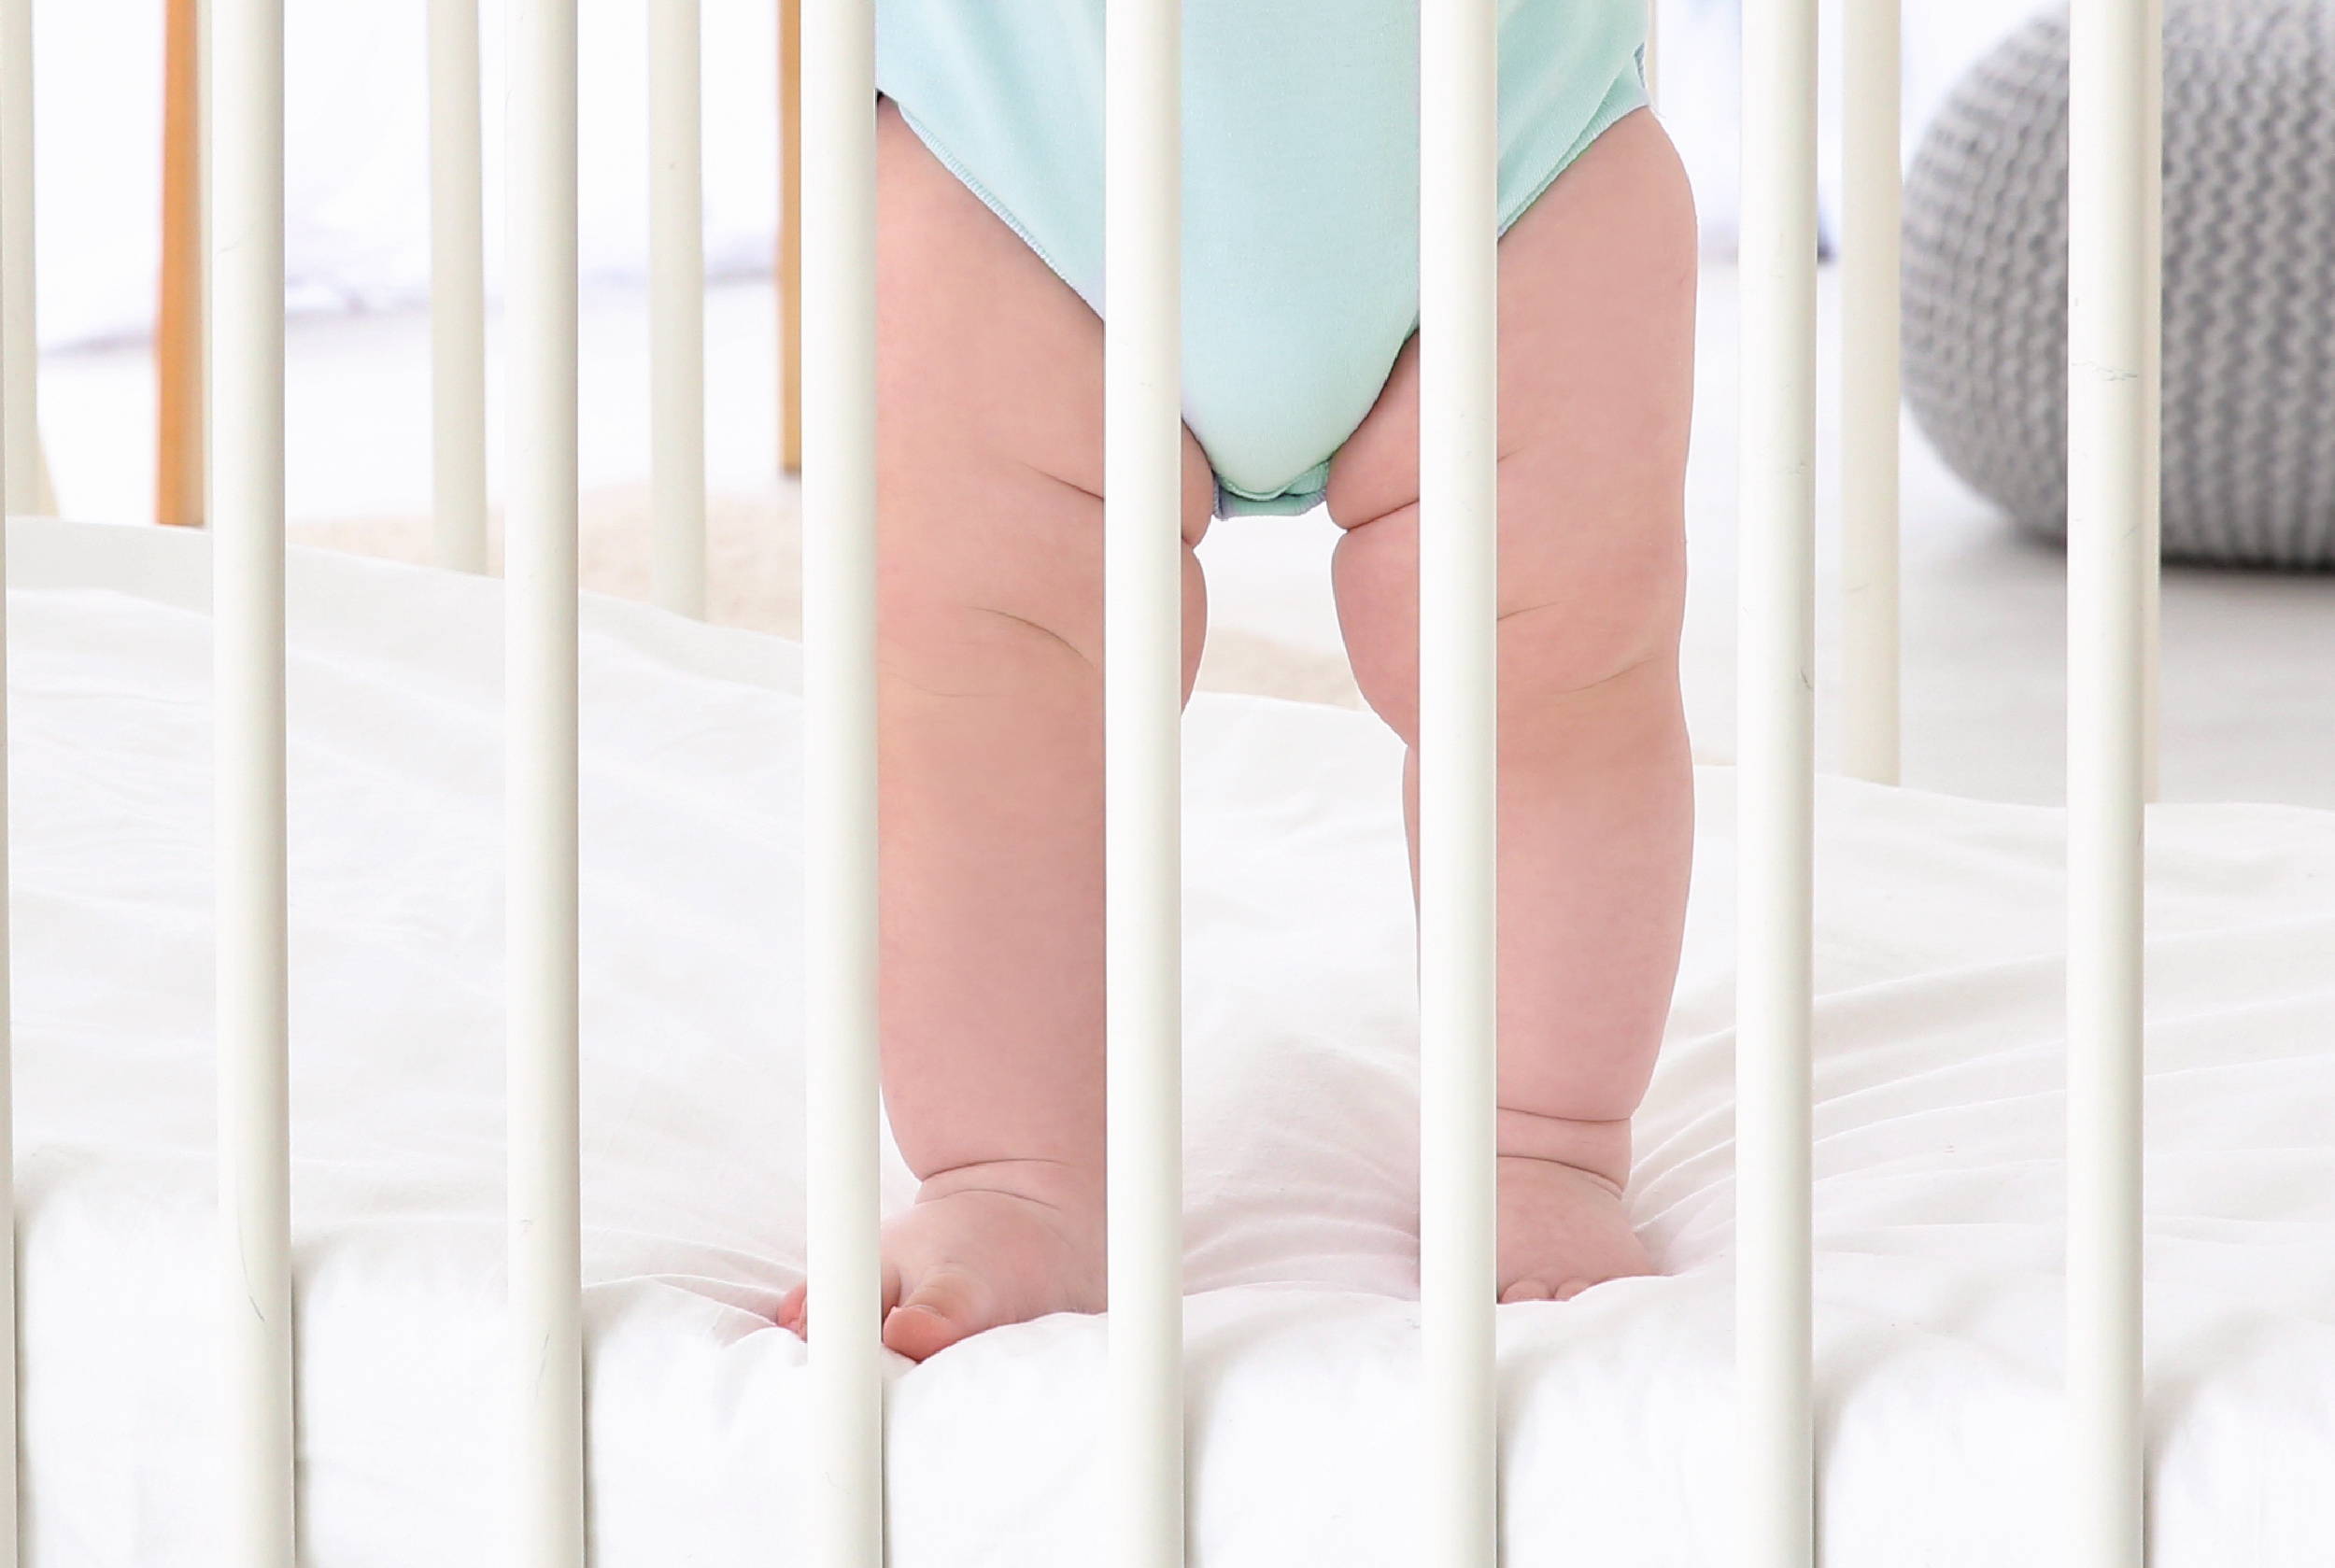 Baby standing on edge of crib mattress with edge support for safety.